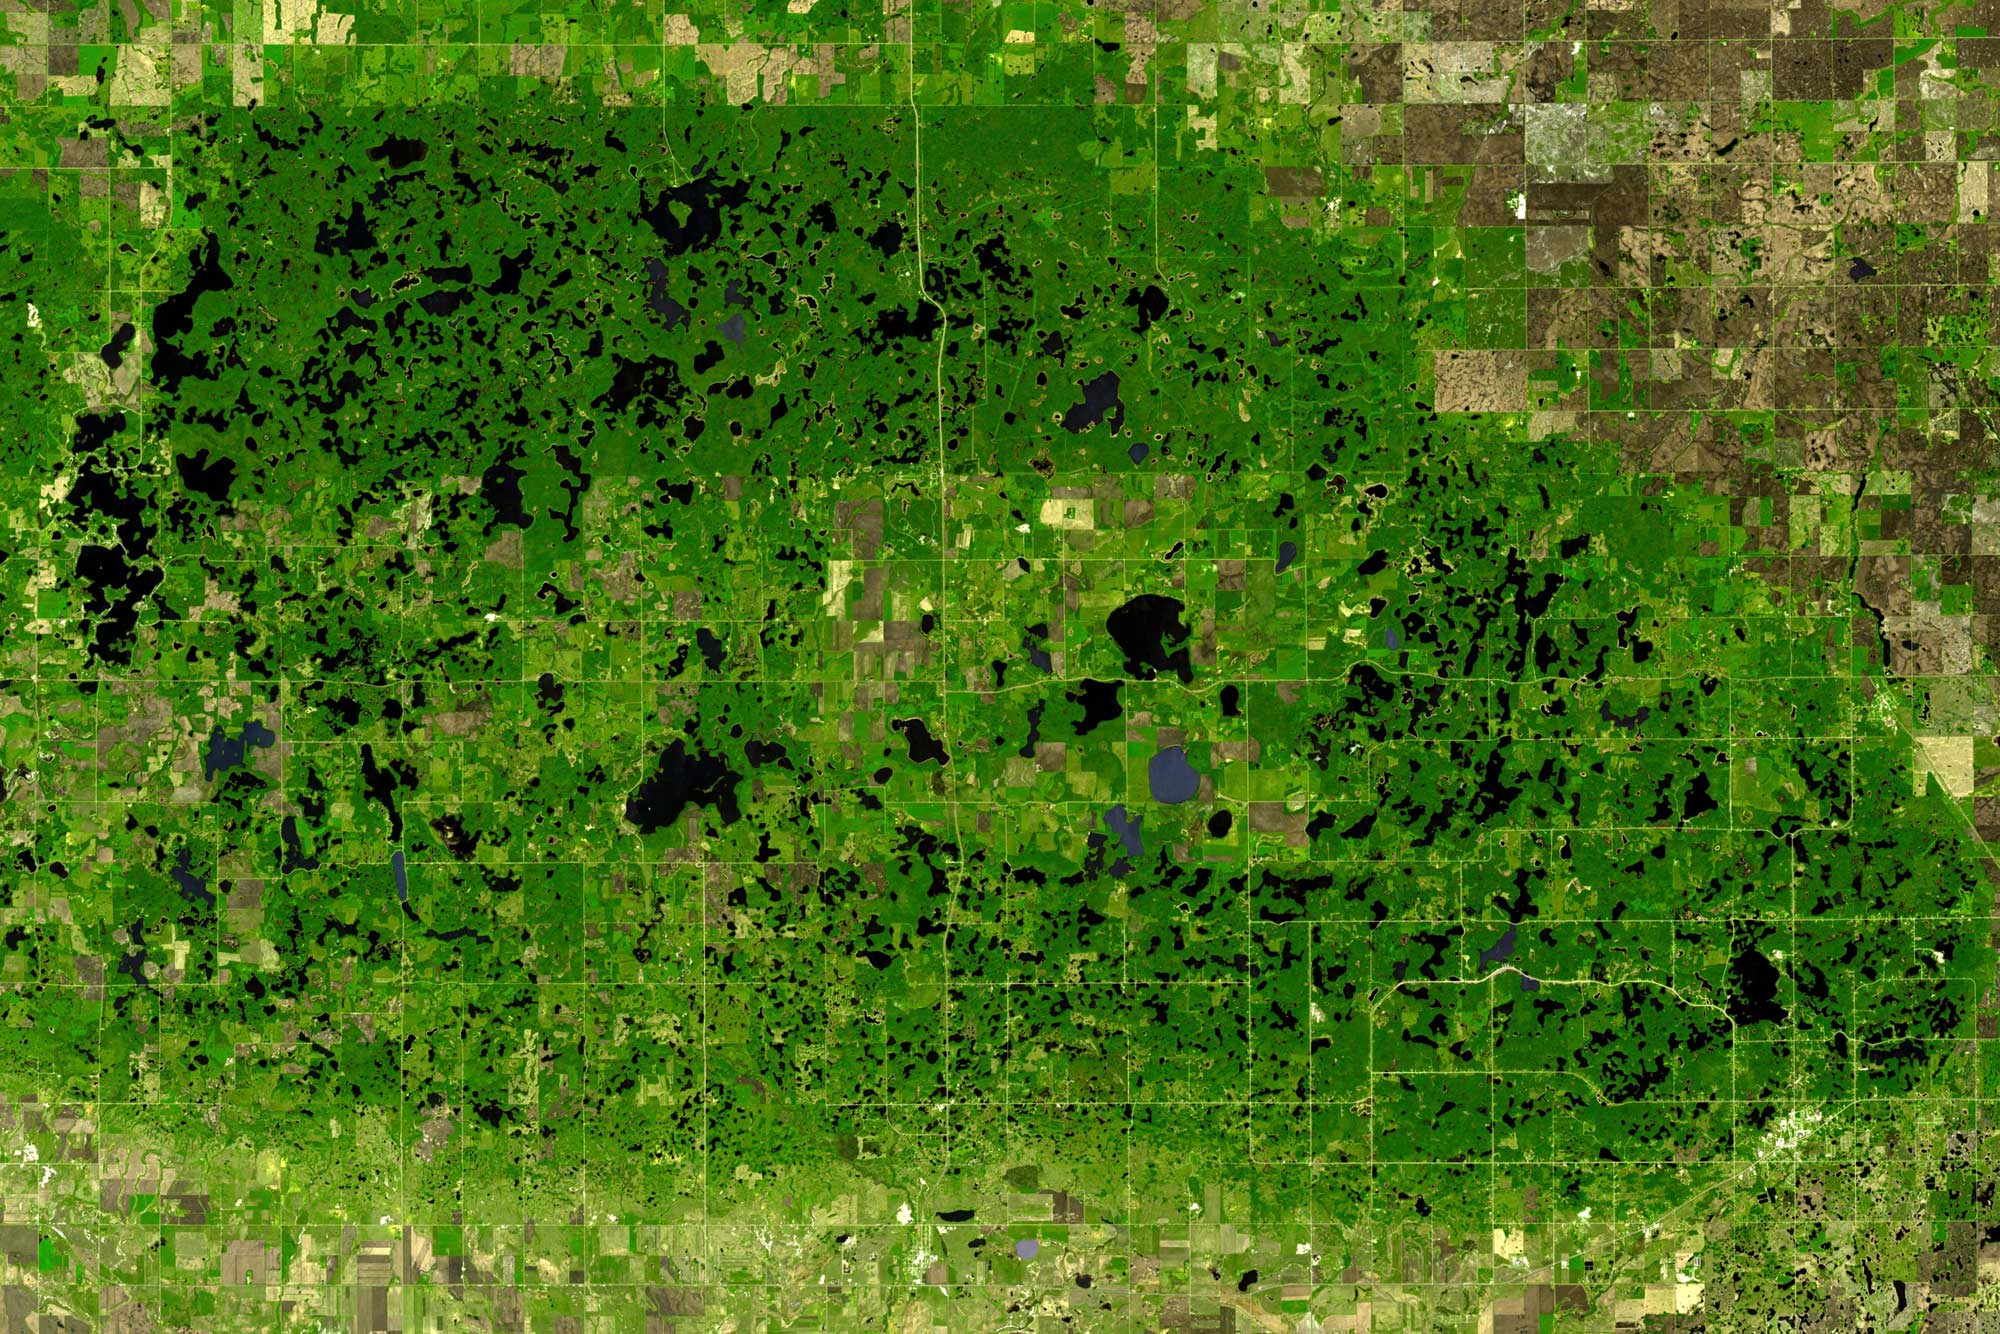 Satellite photograph of the Turtle Mountain area. The image shows a green landscape segmented into grids by roads and, at the edges, probable agricultural fields. A dense concentration of lakes dots much of the landscape.